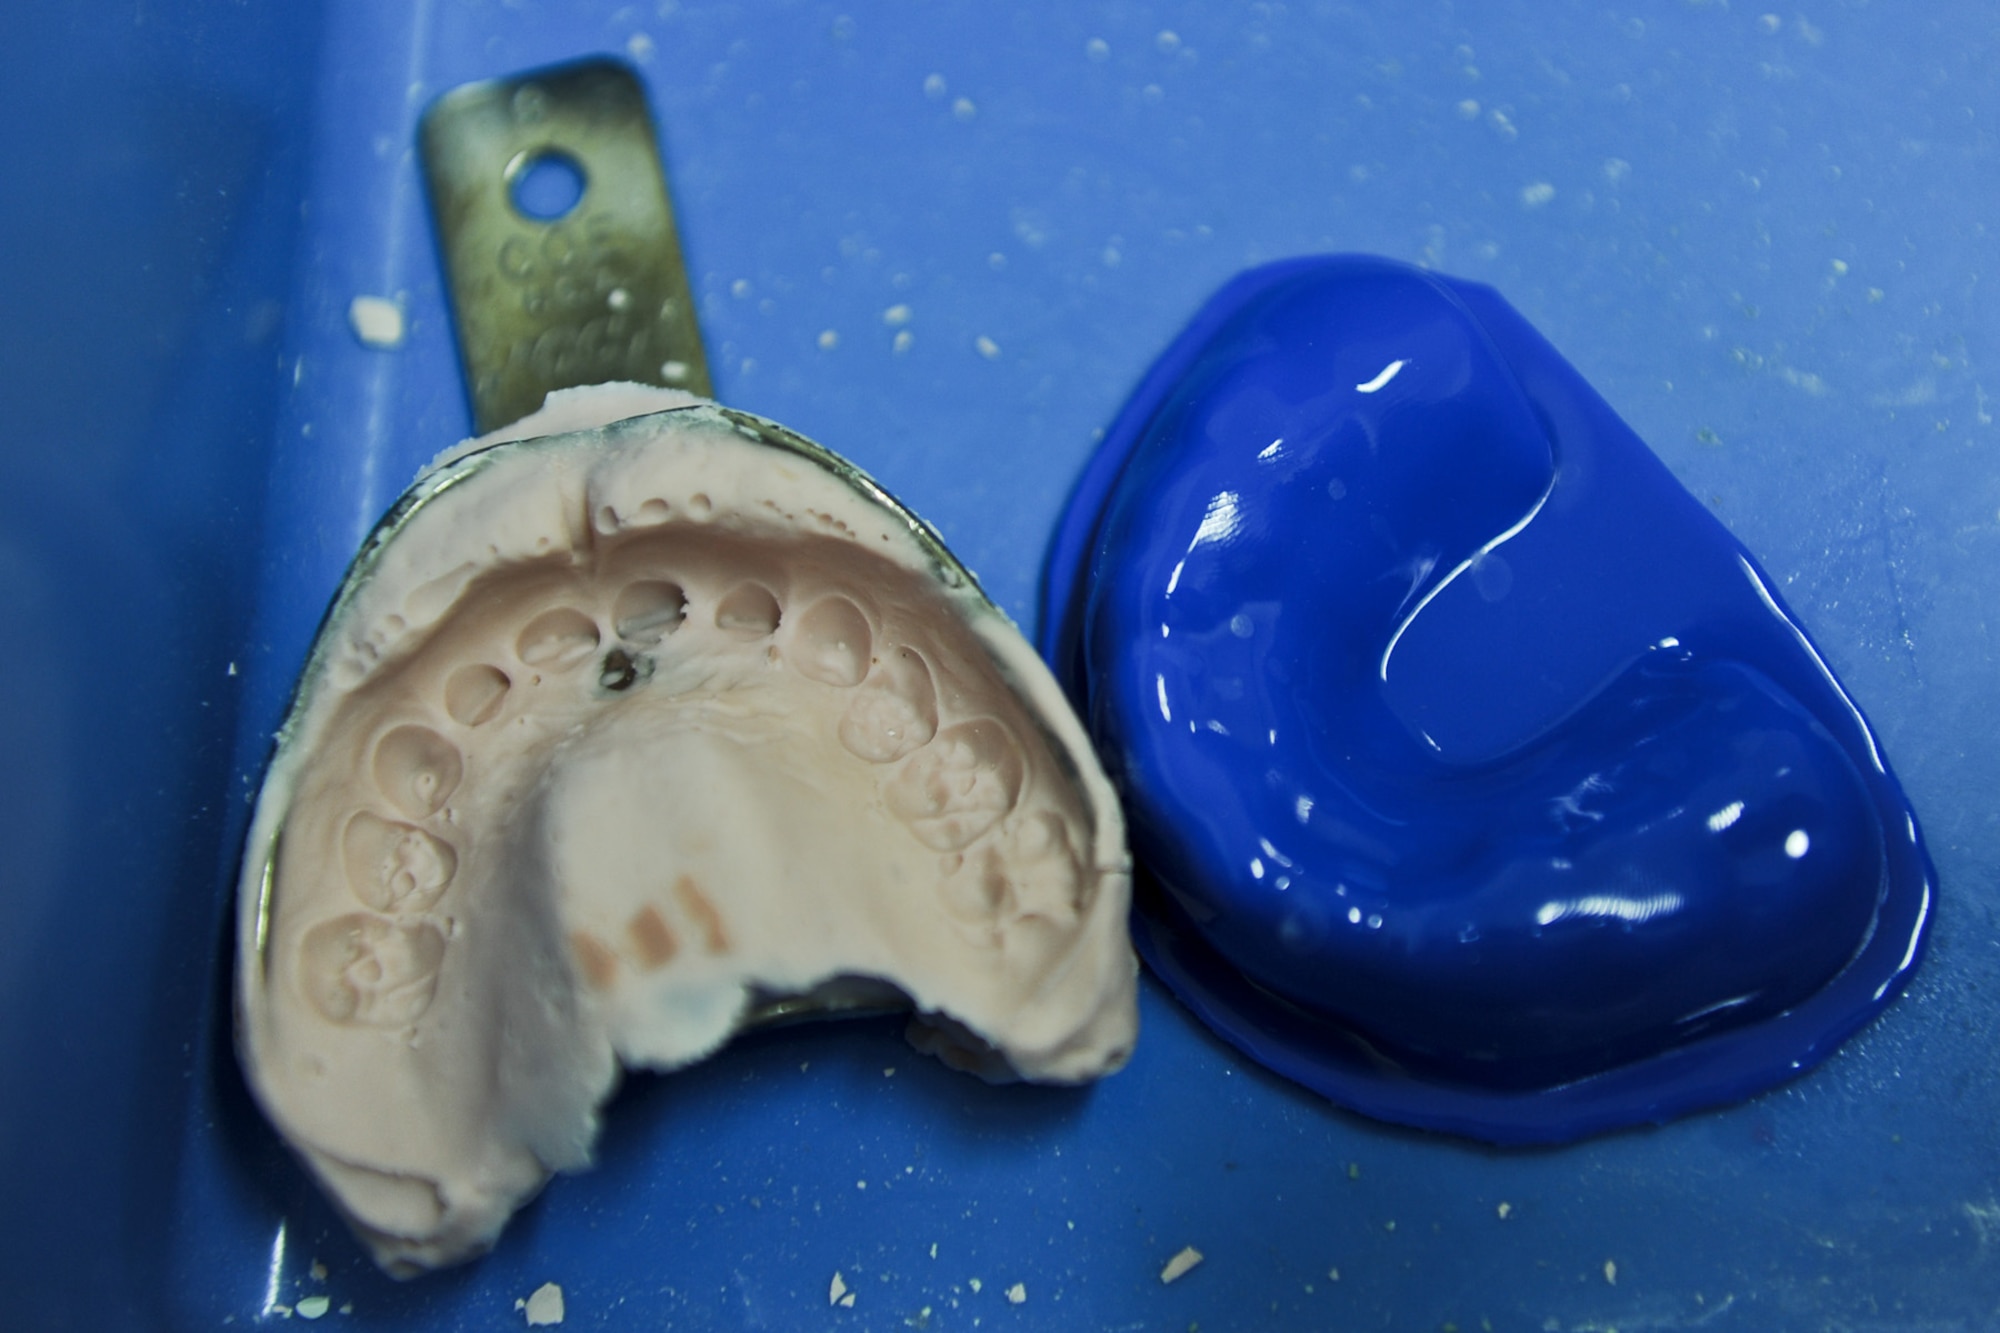 A dental impression sits next to a mouth guard Sept. 7, 2013, at Yokota Air Base, Japan. The 374th Dental Squadron hosted a one-day mouth guard clinic for patients wanting customized mouth guards. Patients who were unable to attend the mouth guard clinic, and still need one, can schedule an appointment with the dental squadron. (U.S. Air Force photo by Senior Airman Desiree Economides/Released)